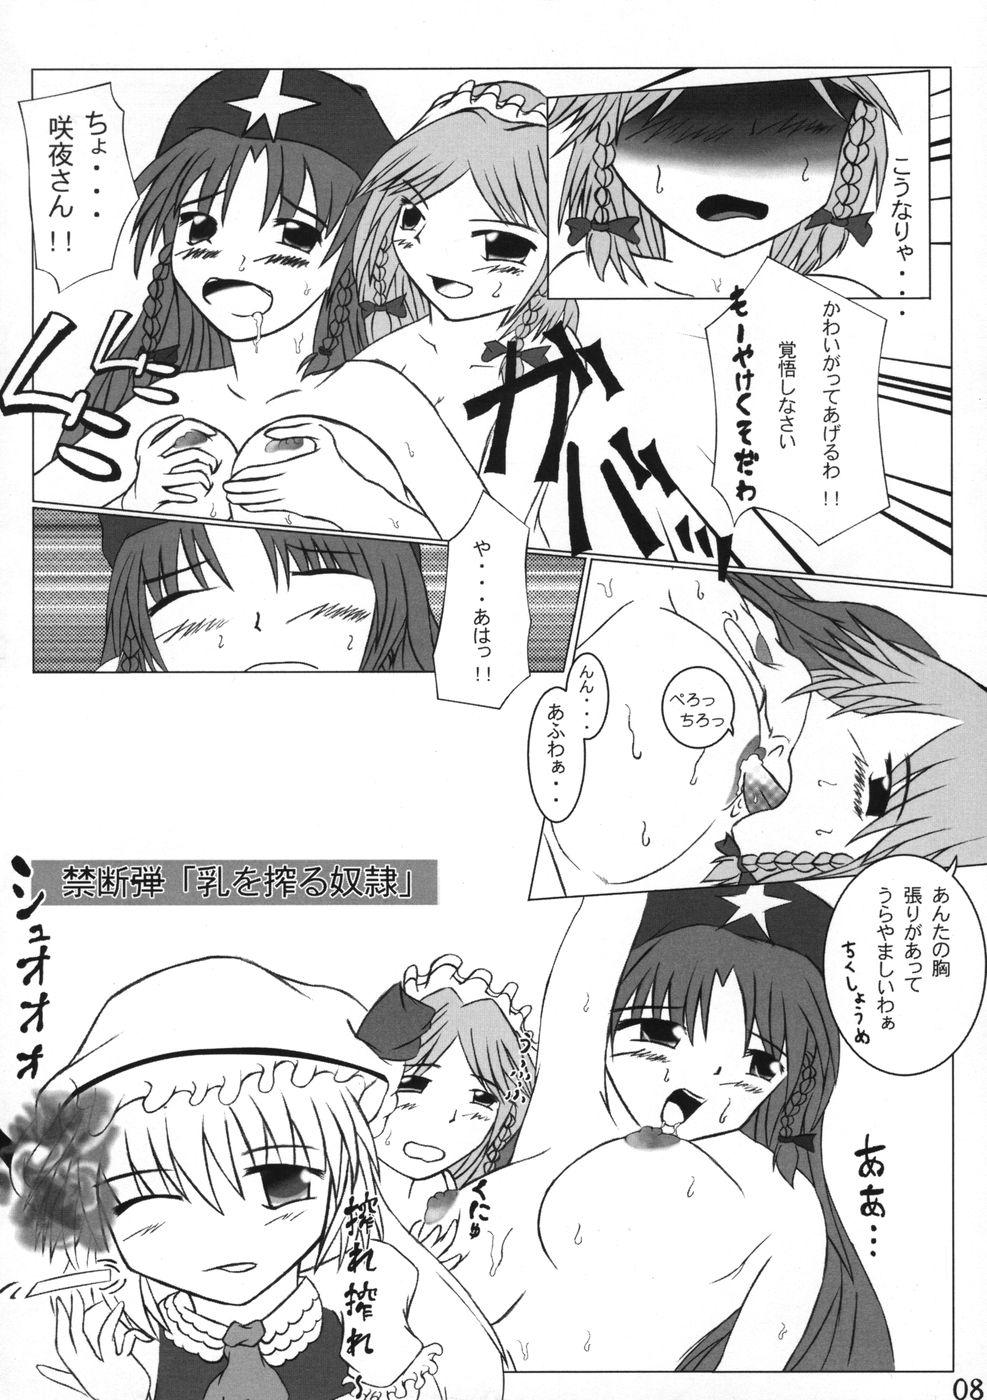 Blow Job 業創りし風 - Touhou project Point Of View - Page 8